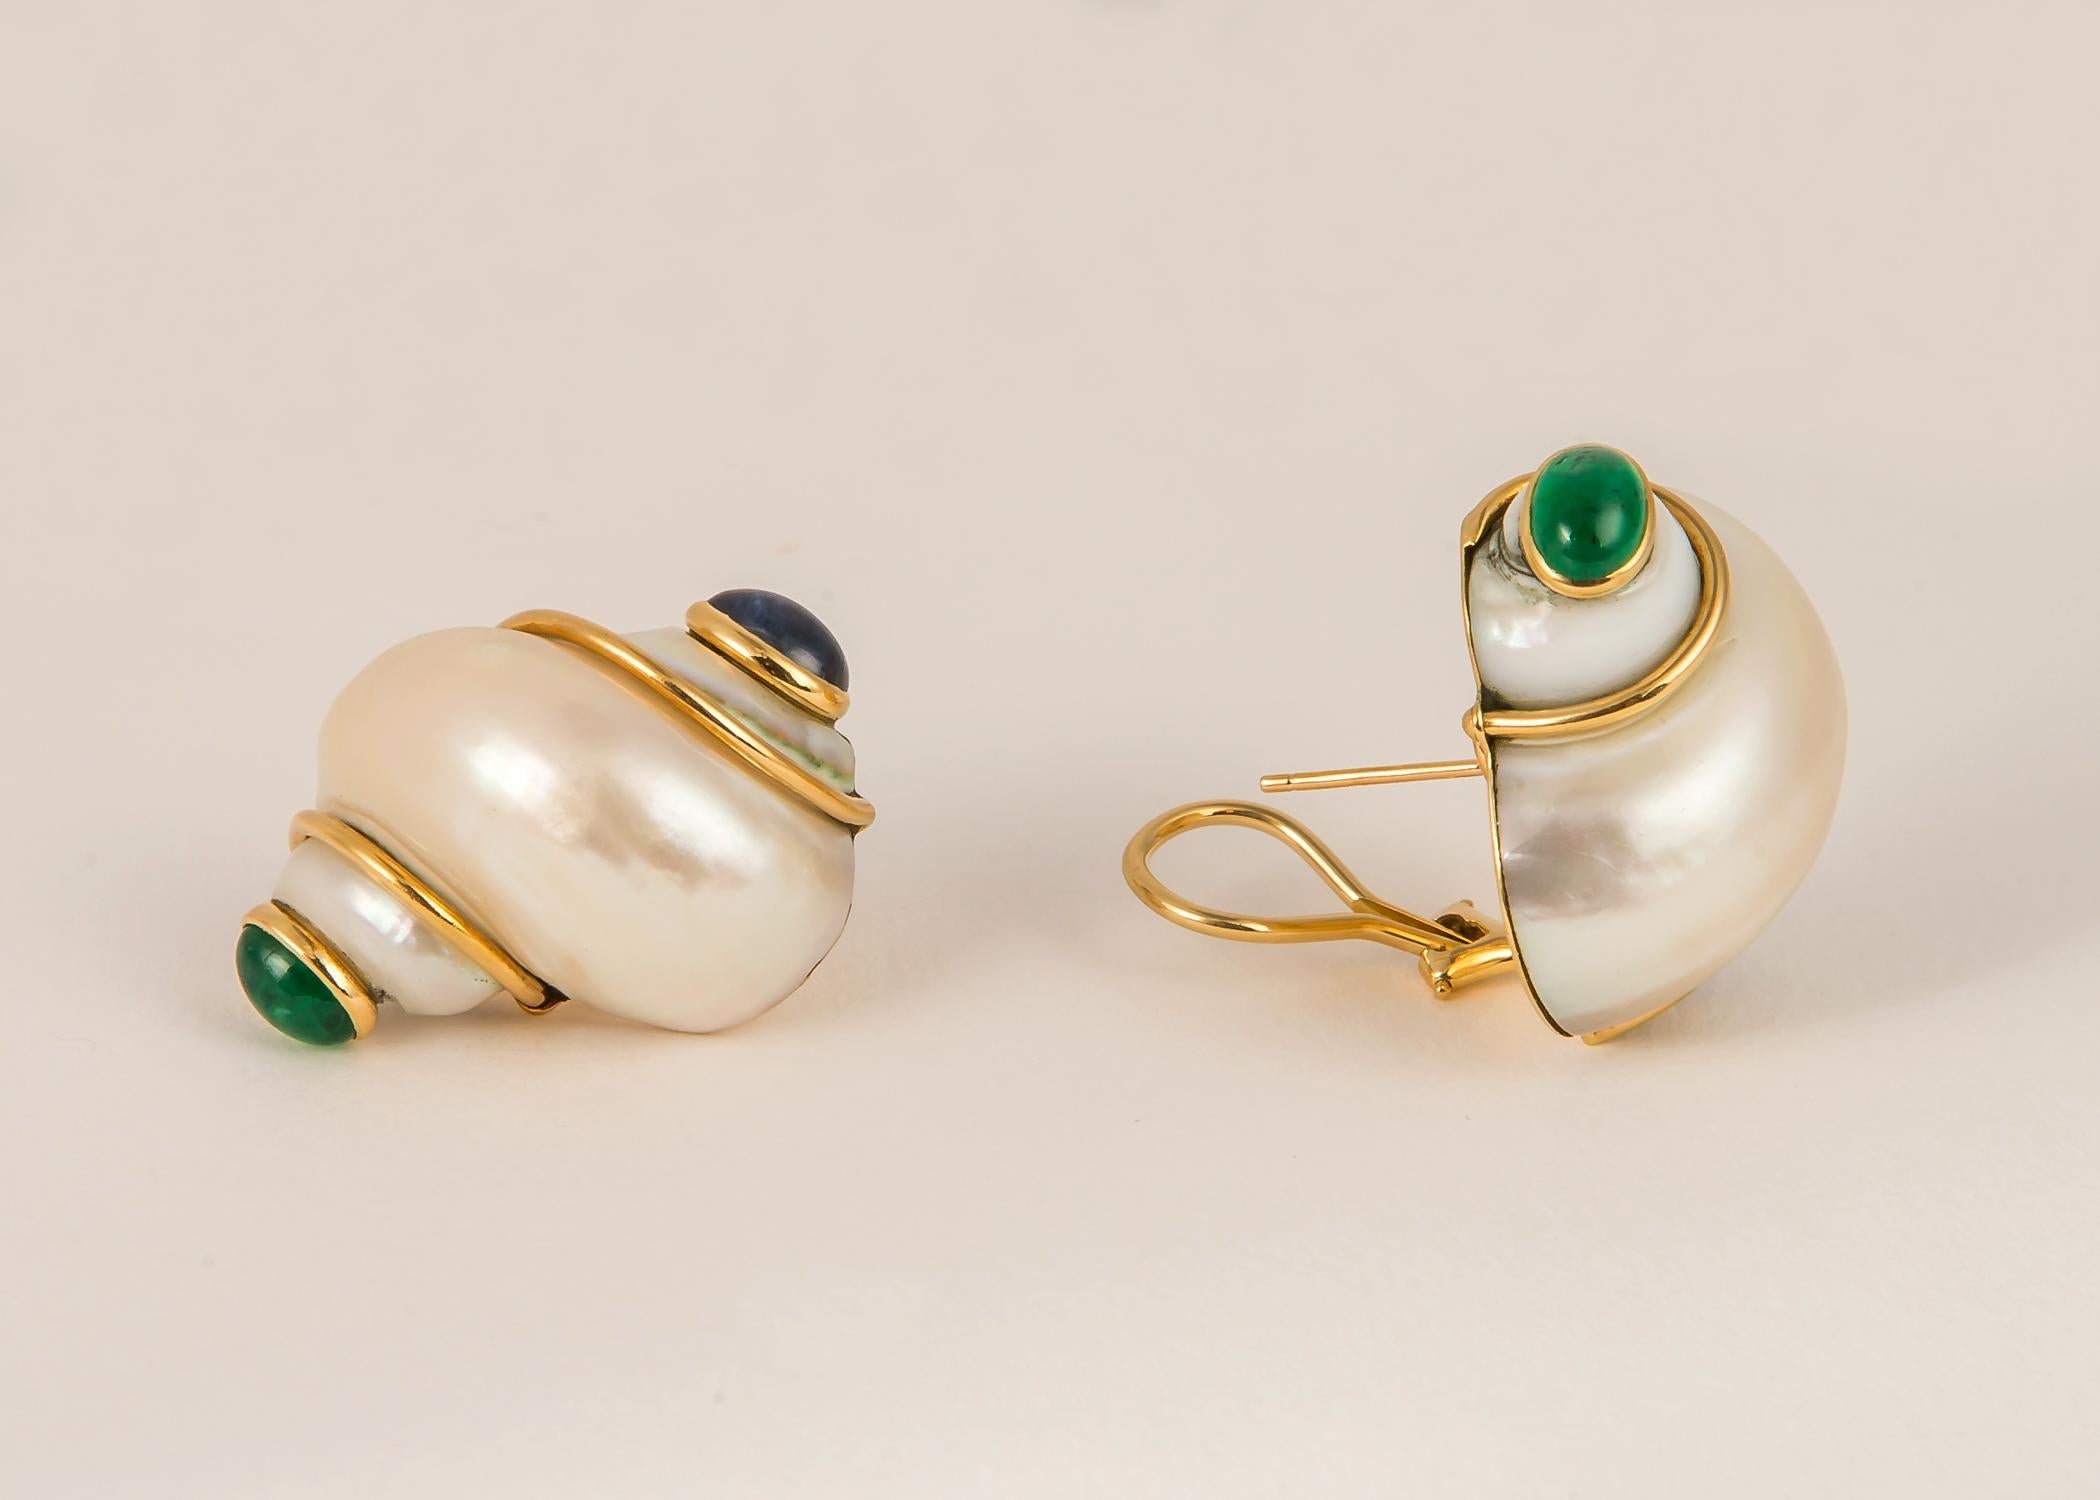 The turbo shell earring is a recognizable iconic Seaman Schepps design. This pair measures 1 1/4 inches in length with emerald and sapphire end caps. 